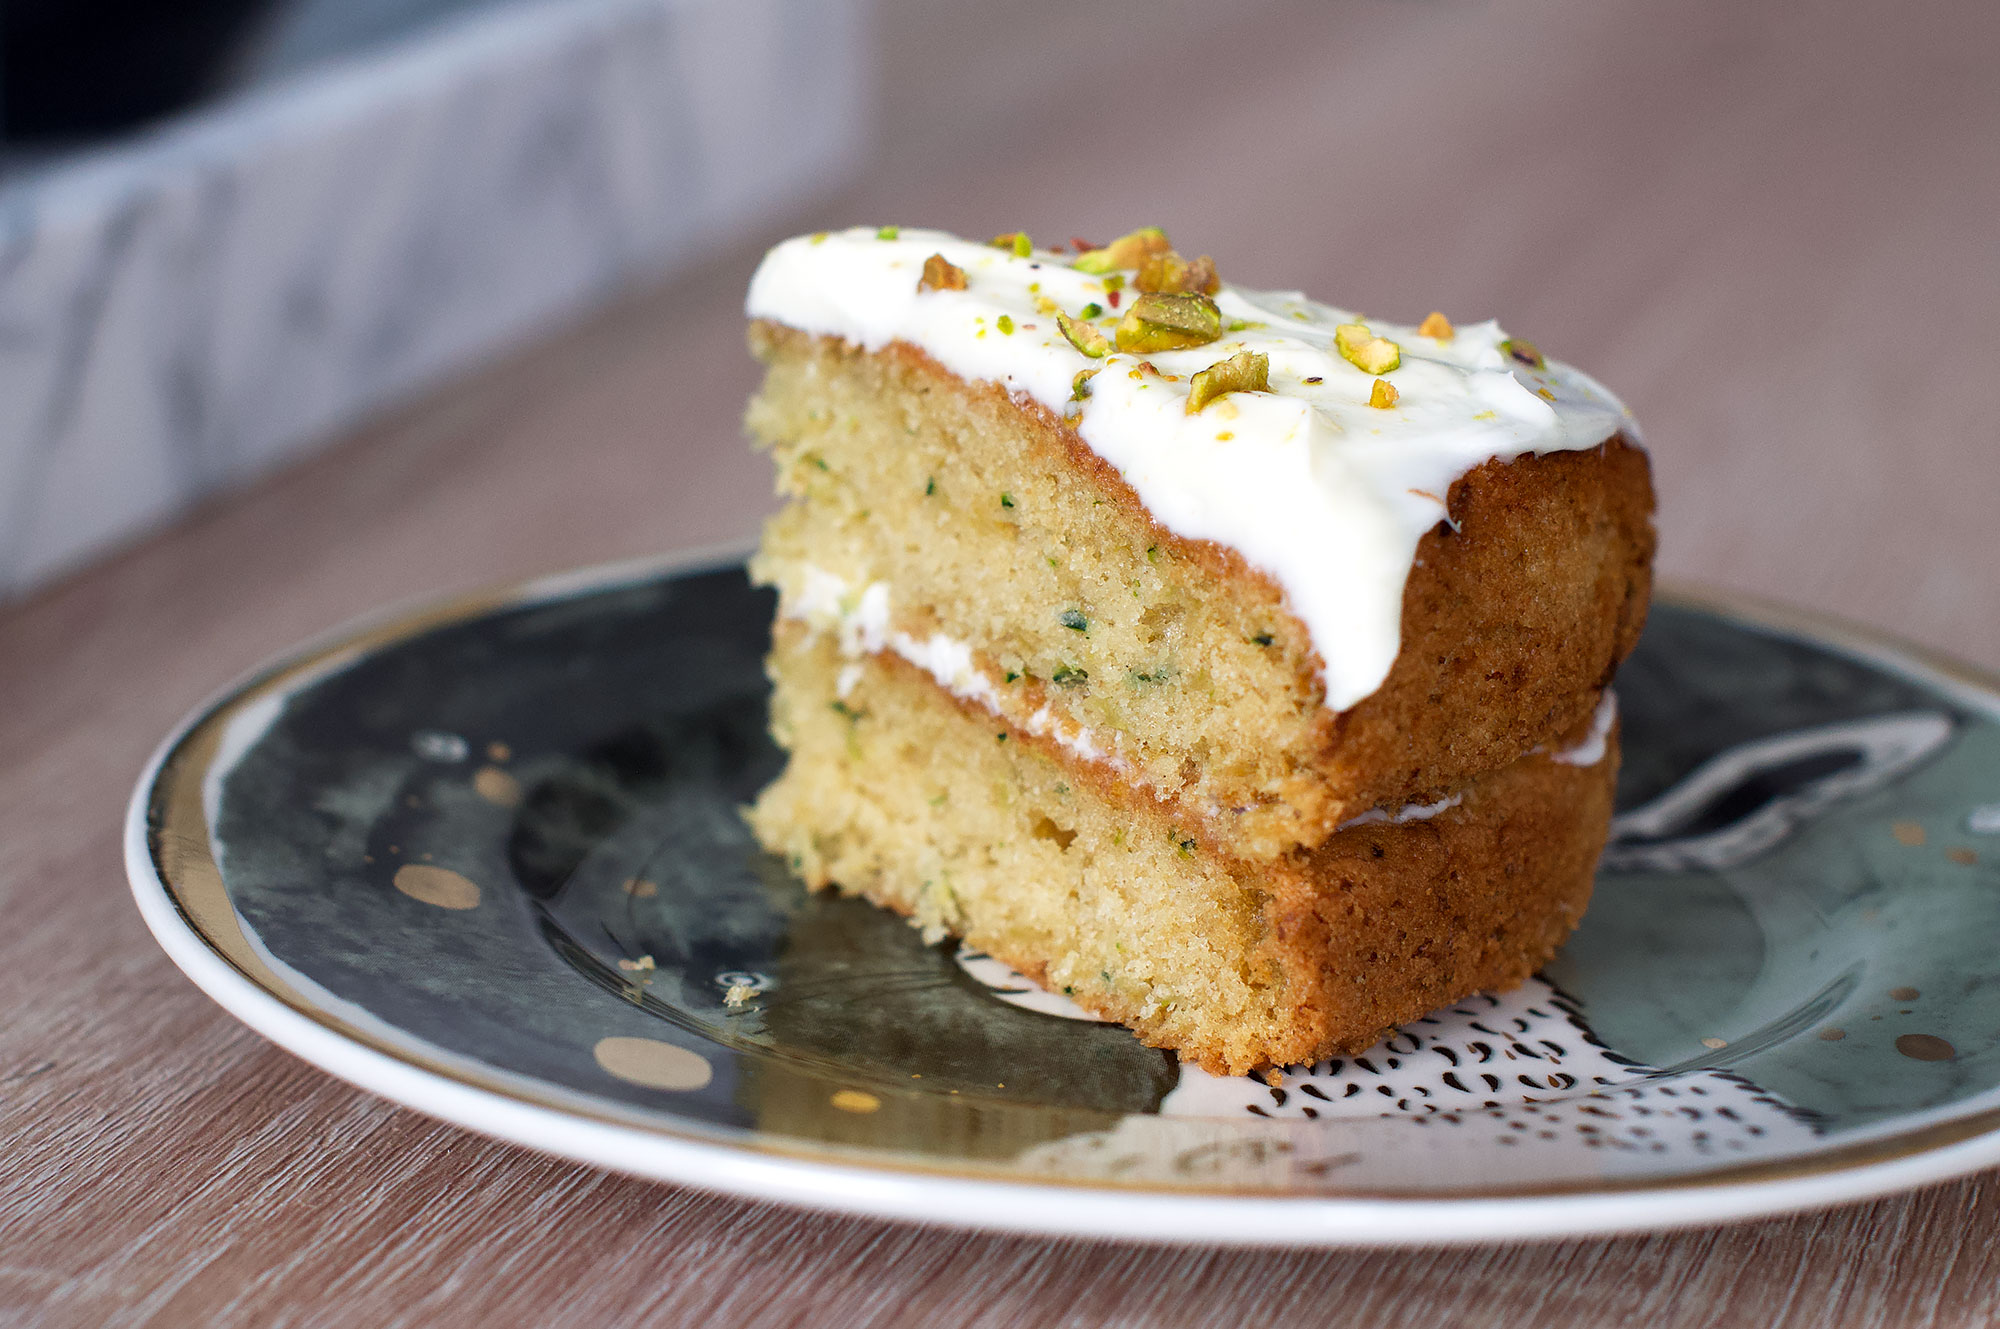 Recipe for courgette cake with cream cheese frosting and pistachios